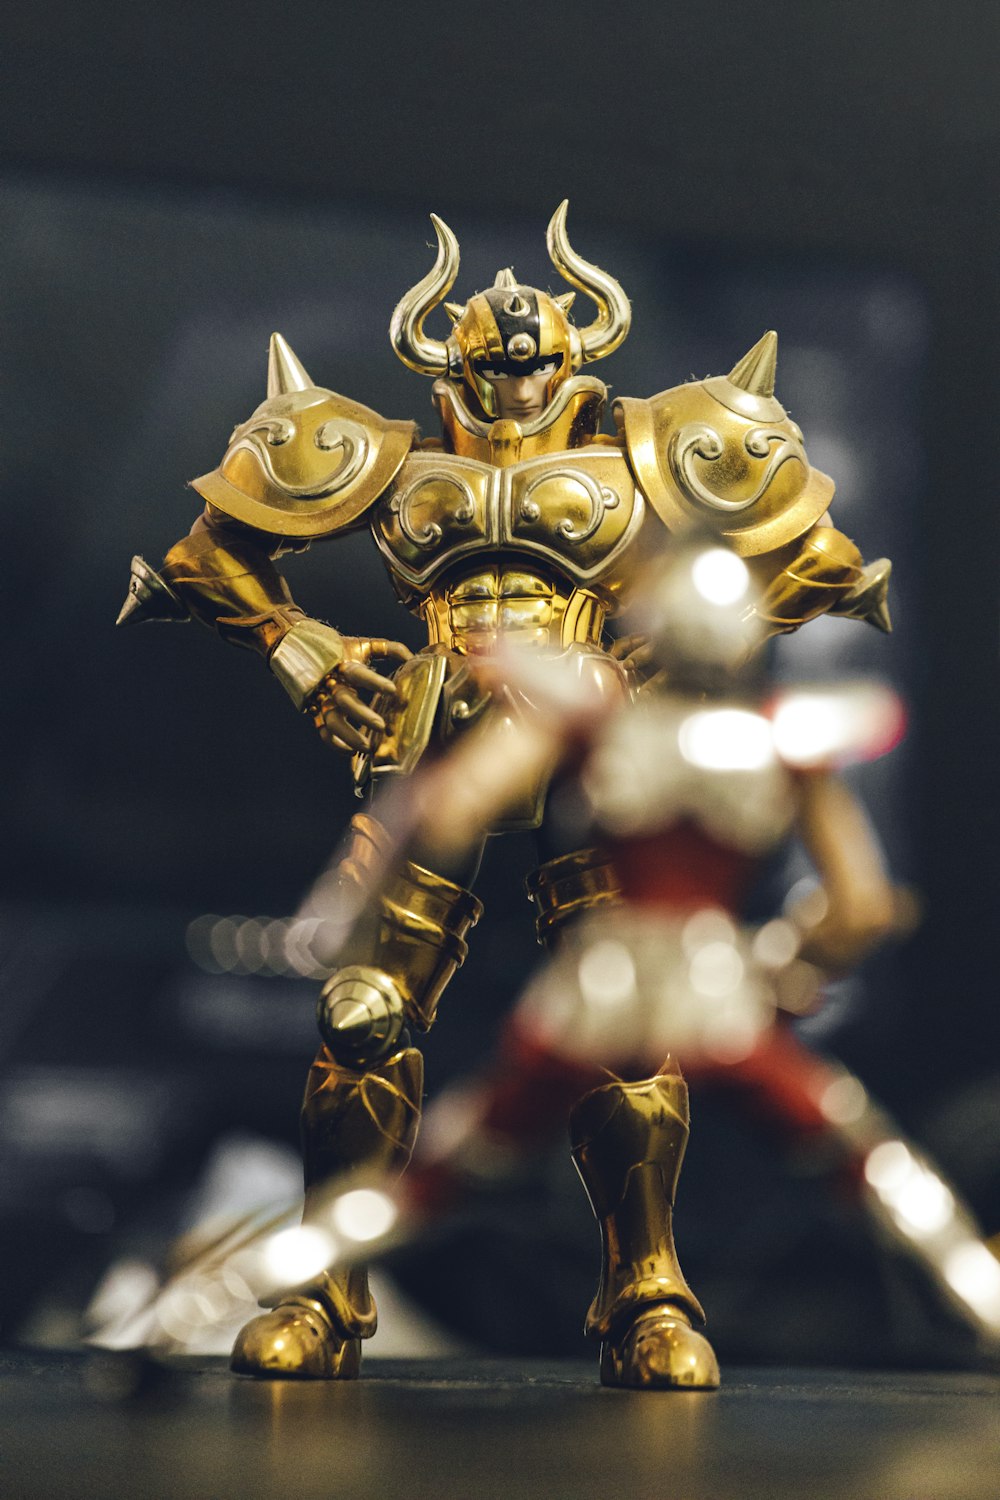 a toy figurine of a man in armor